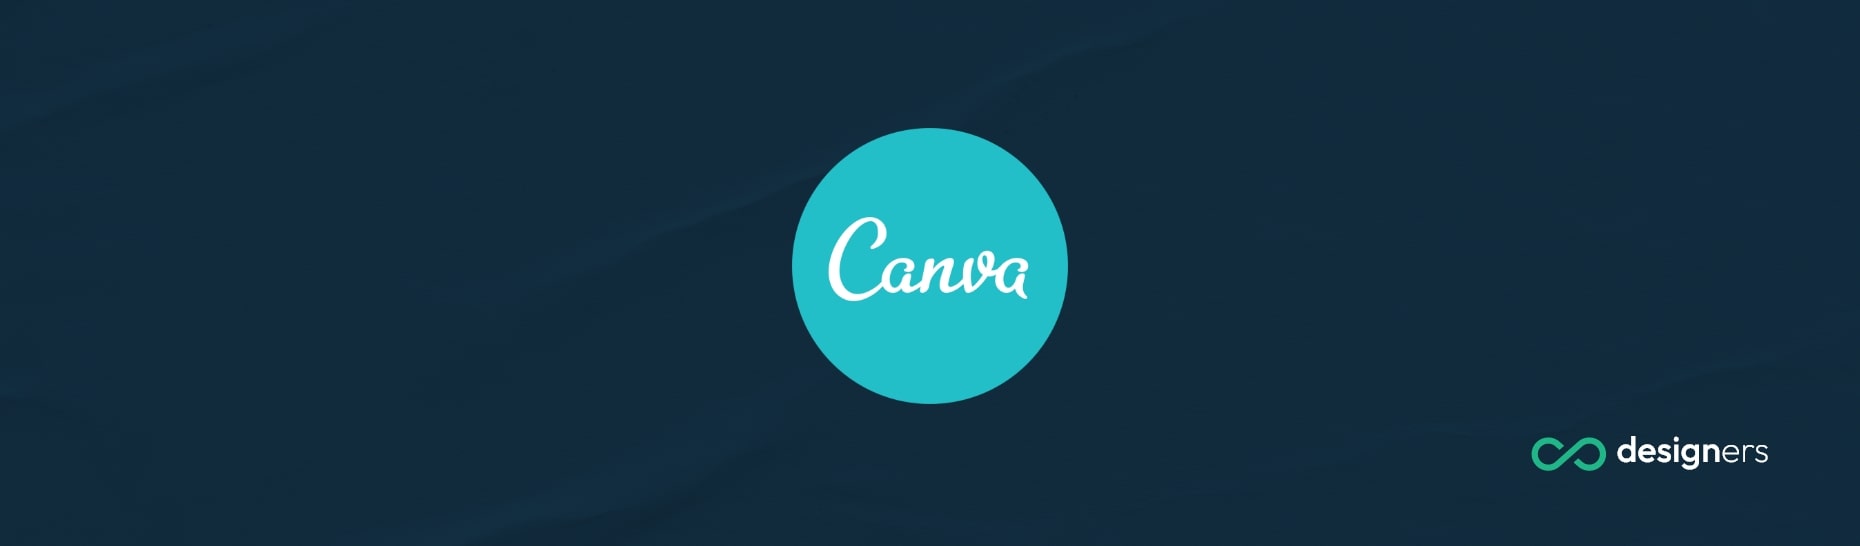 How Do You Make Clothing Tags With Canva?